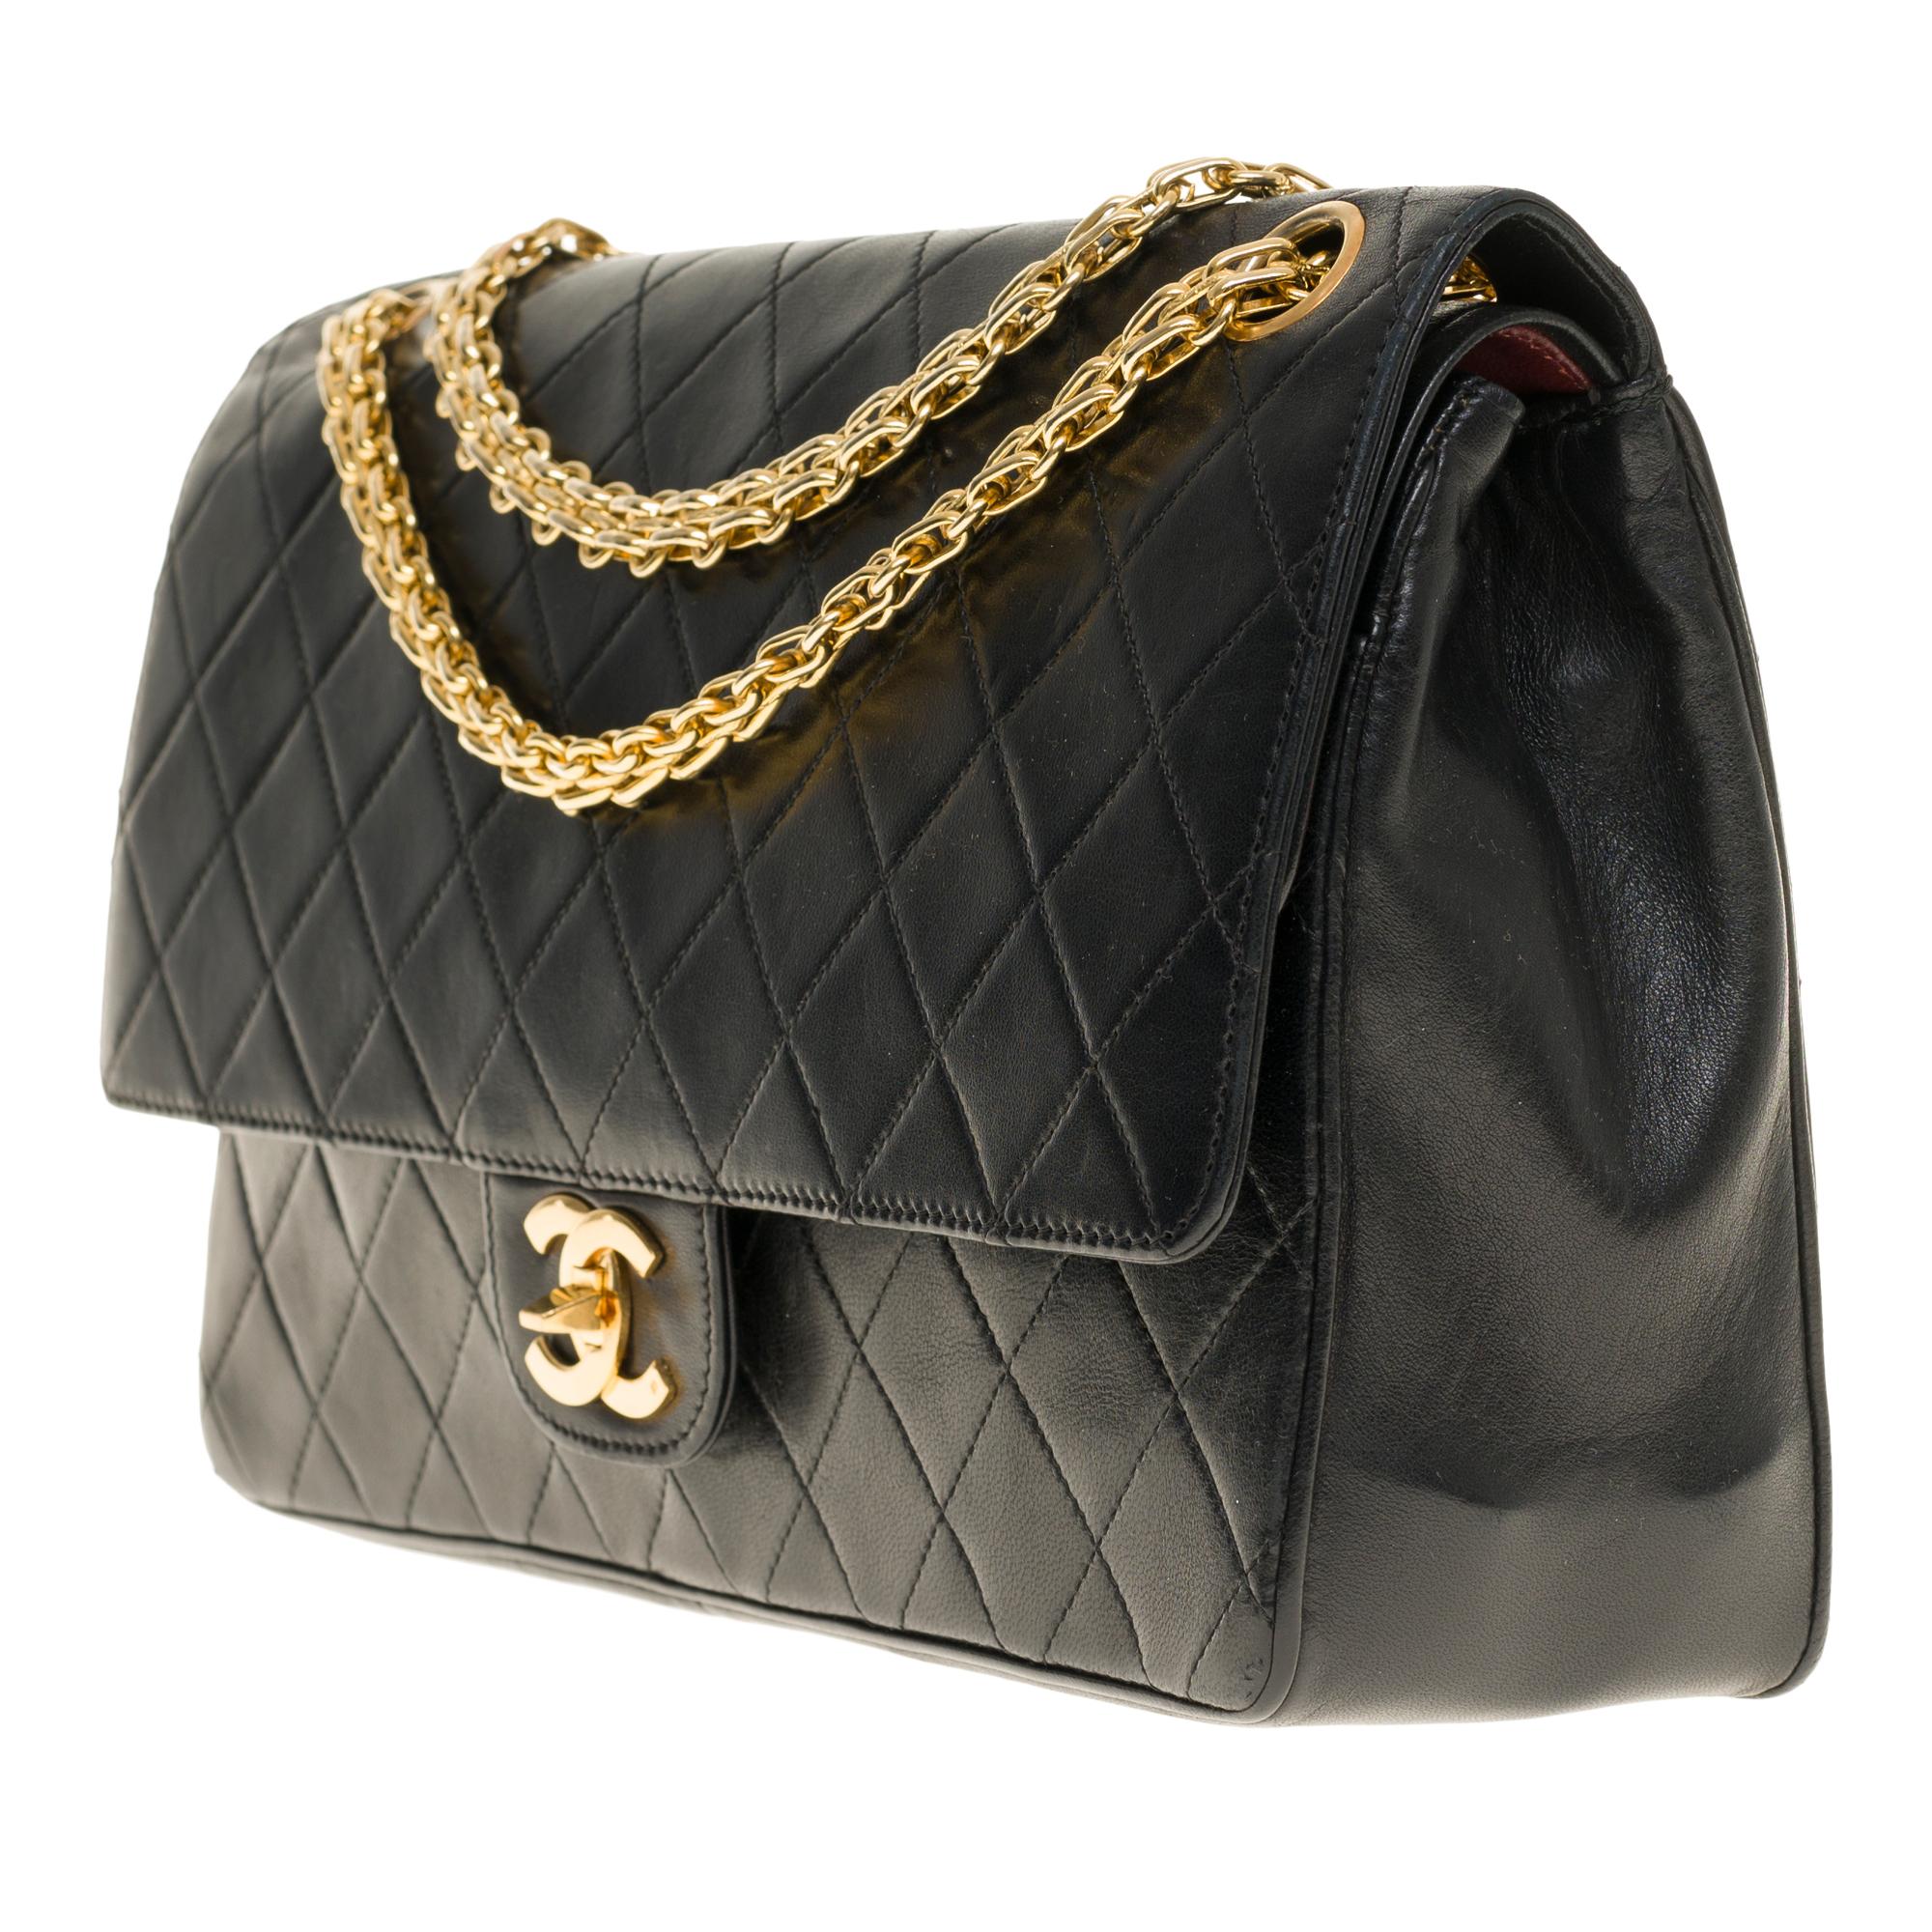 Black Chanel Classic shoulder bag in black quilted lambskin and gold hardware